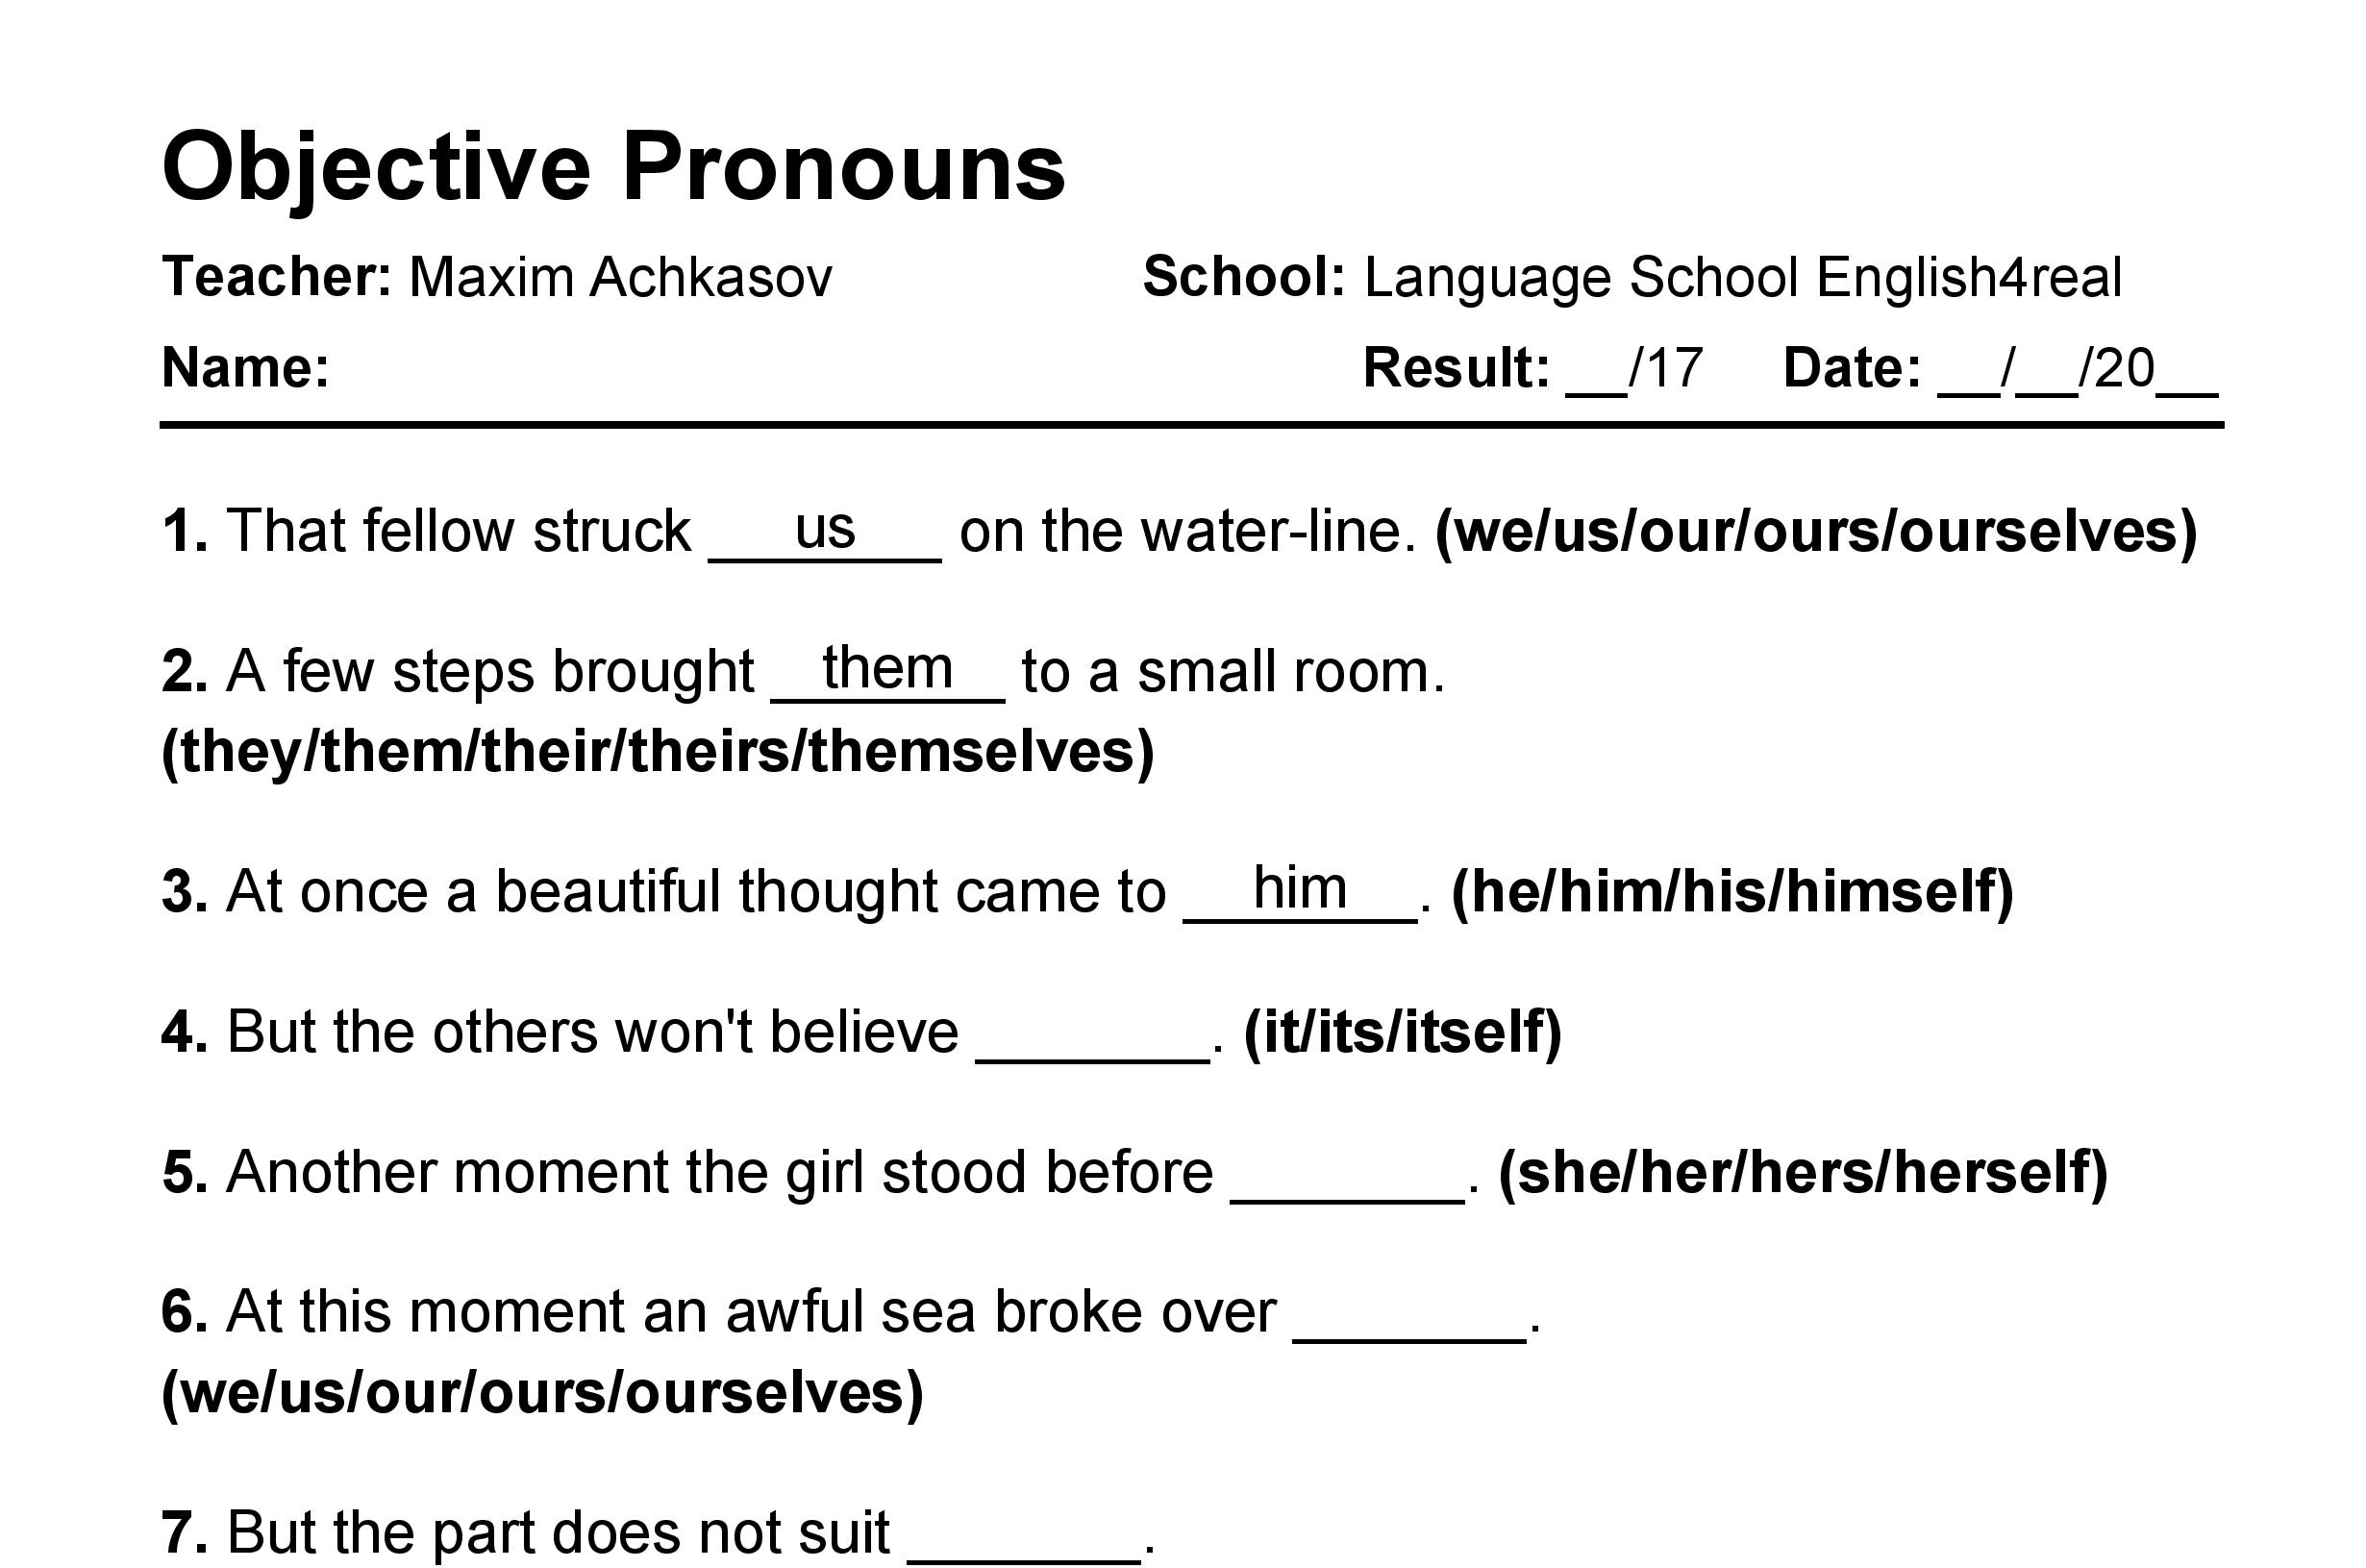 English grammar fill in the blanks exercises with answers in PDF - Objective Pronoun